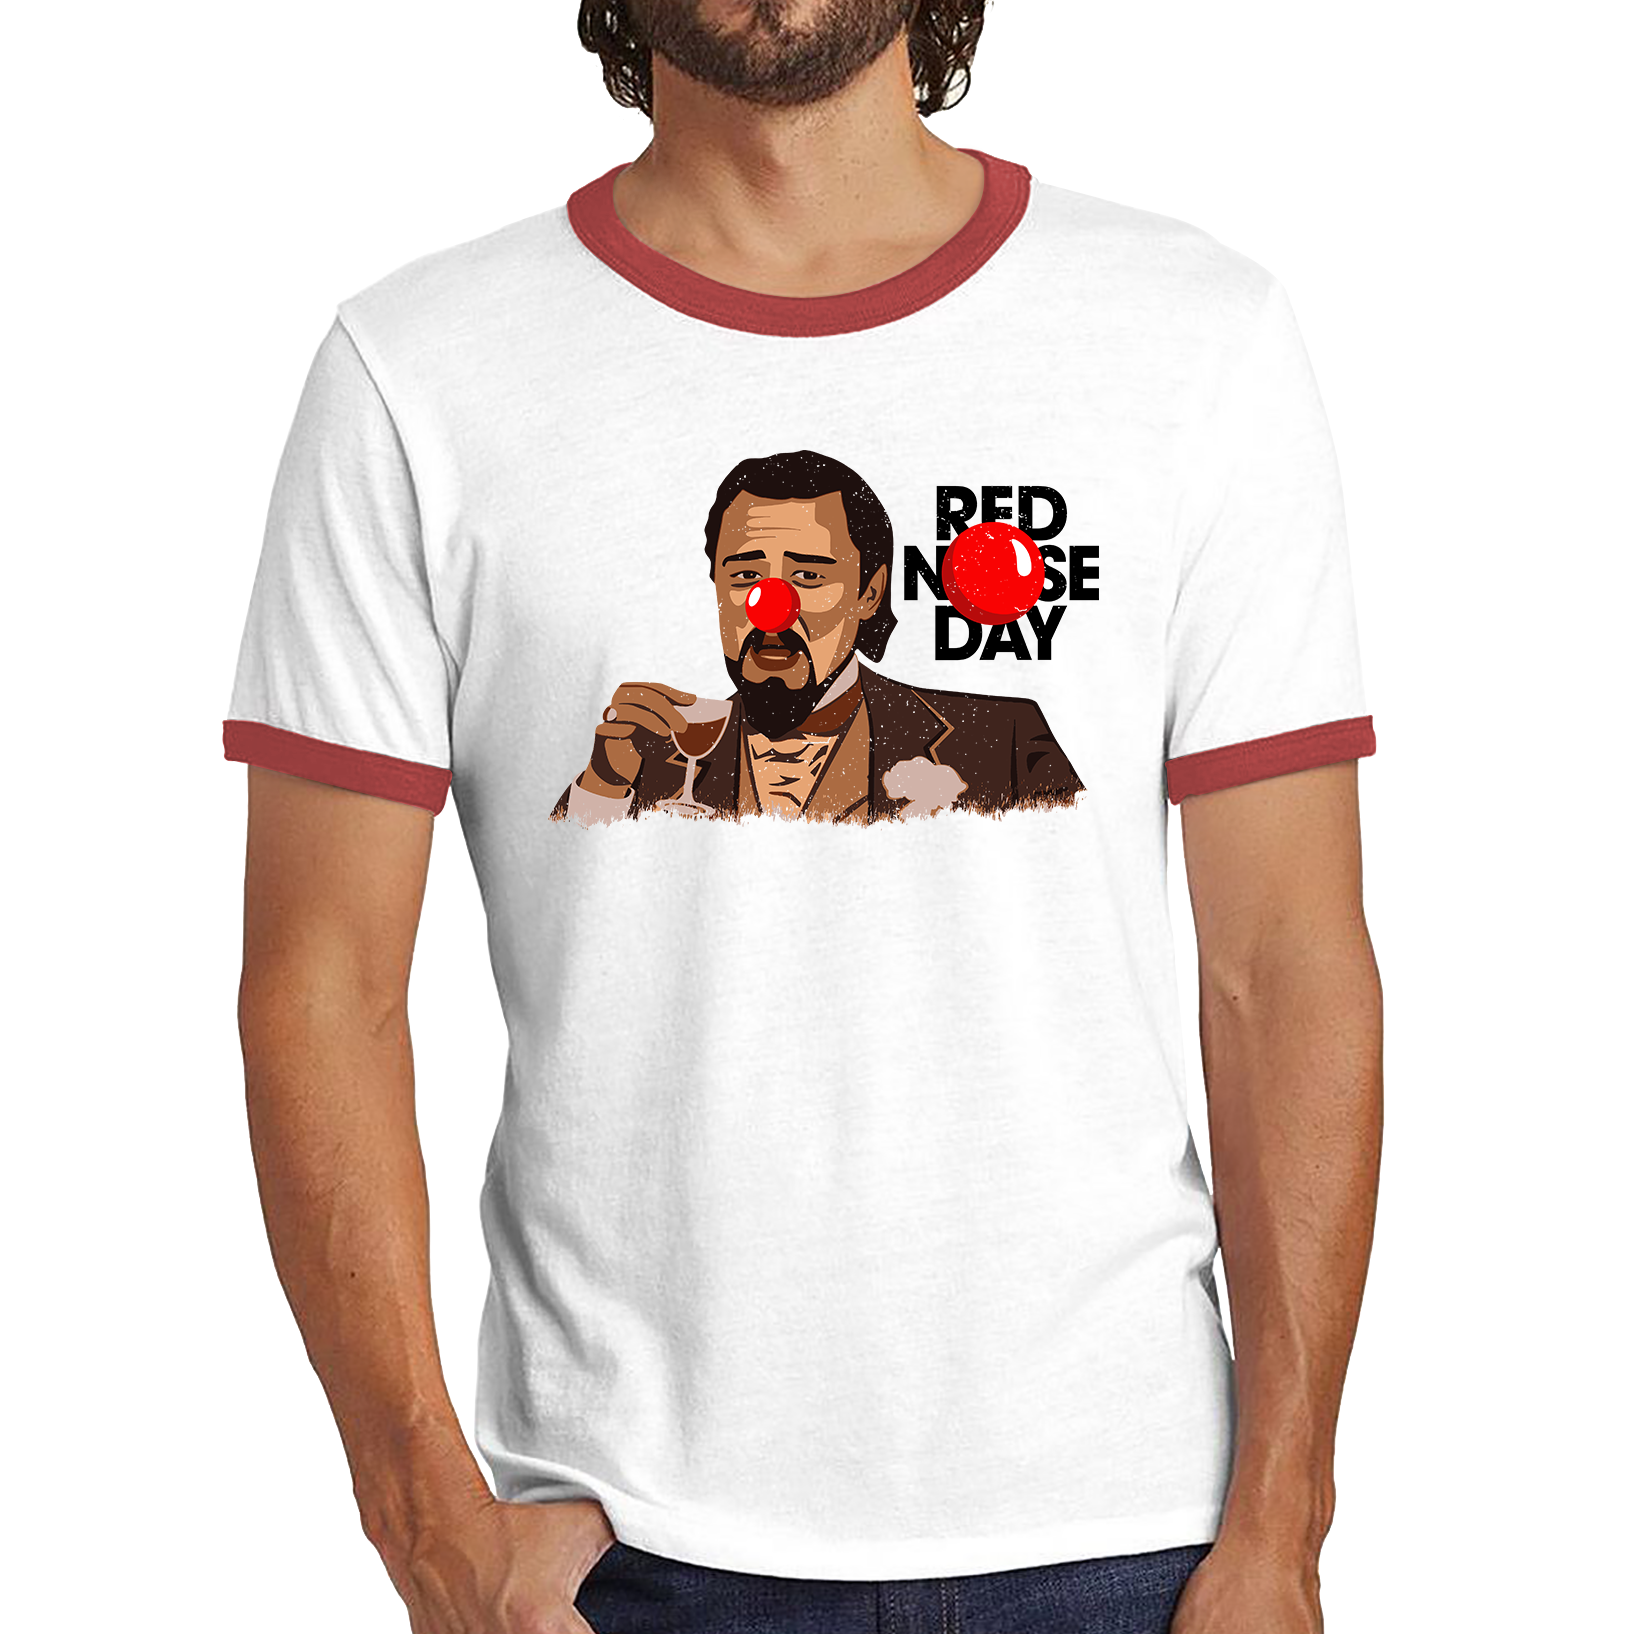 Leonardo Dicaprio Laughing Meme Red Nose Day Ringer T Shirt. 50% Goes To Charity